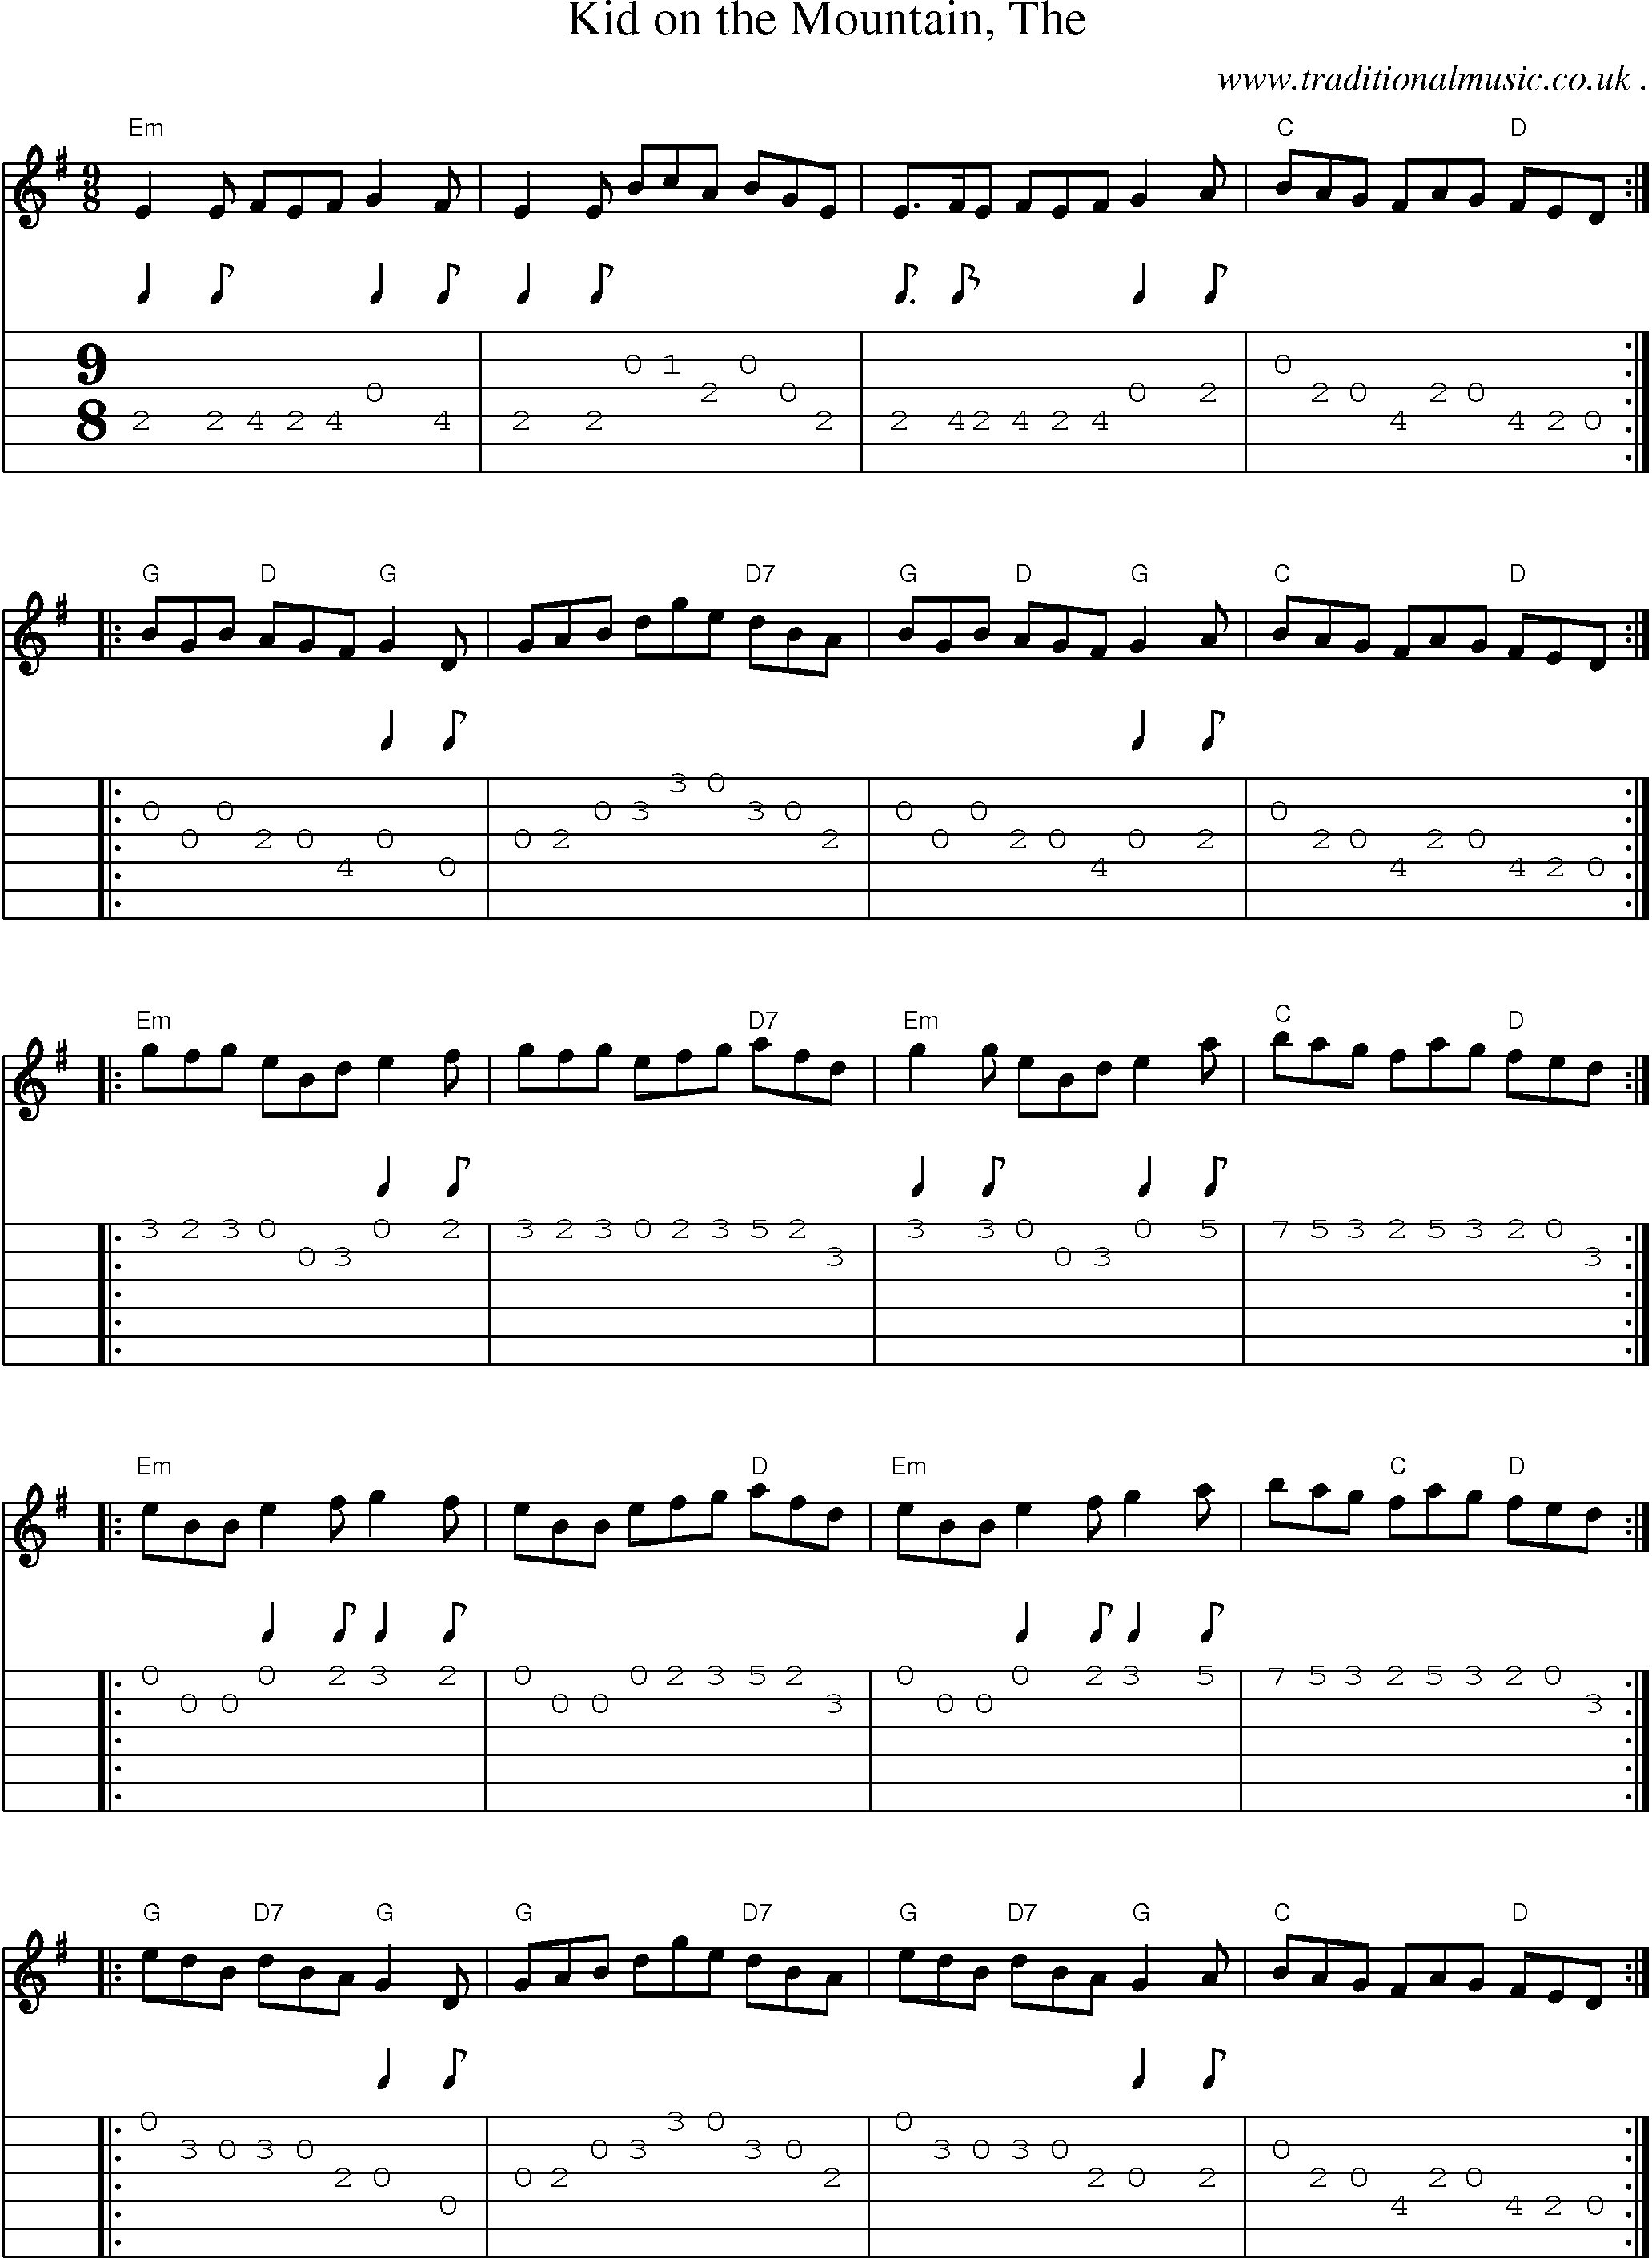 Music Score and Guitar Tabs for Kid on the Mountain The